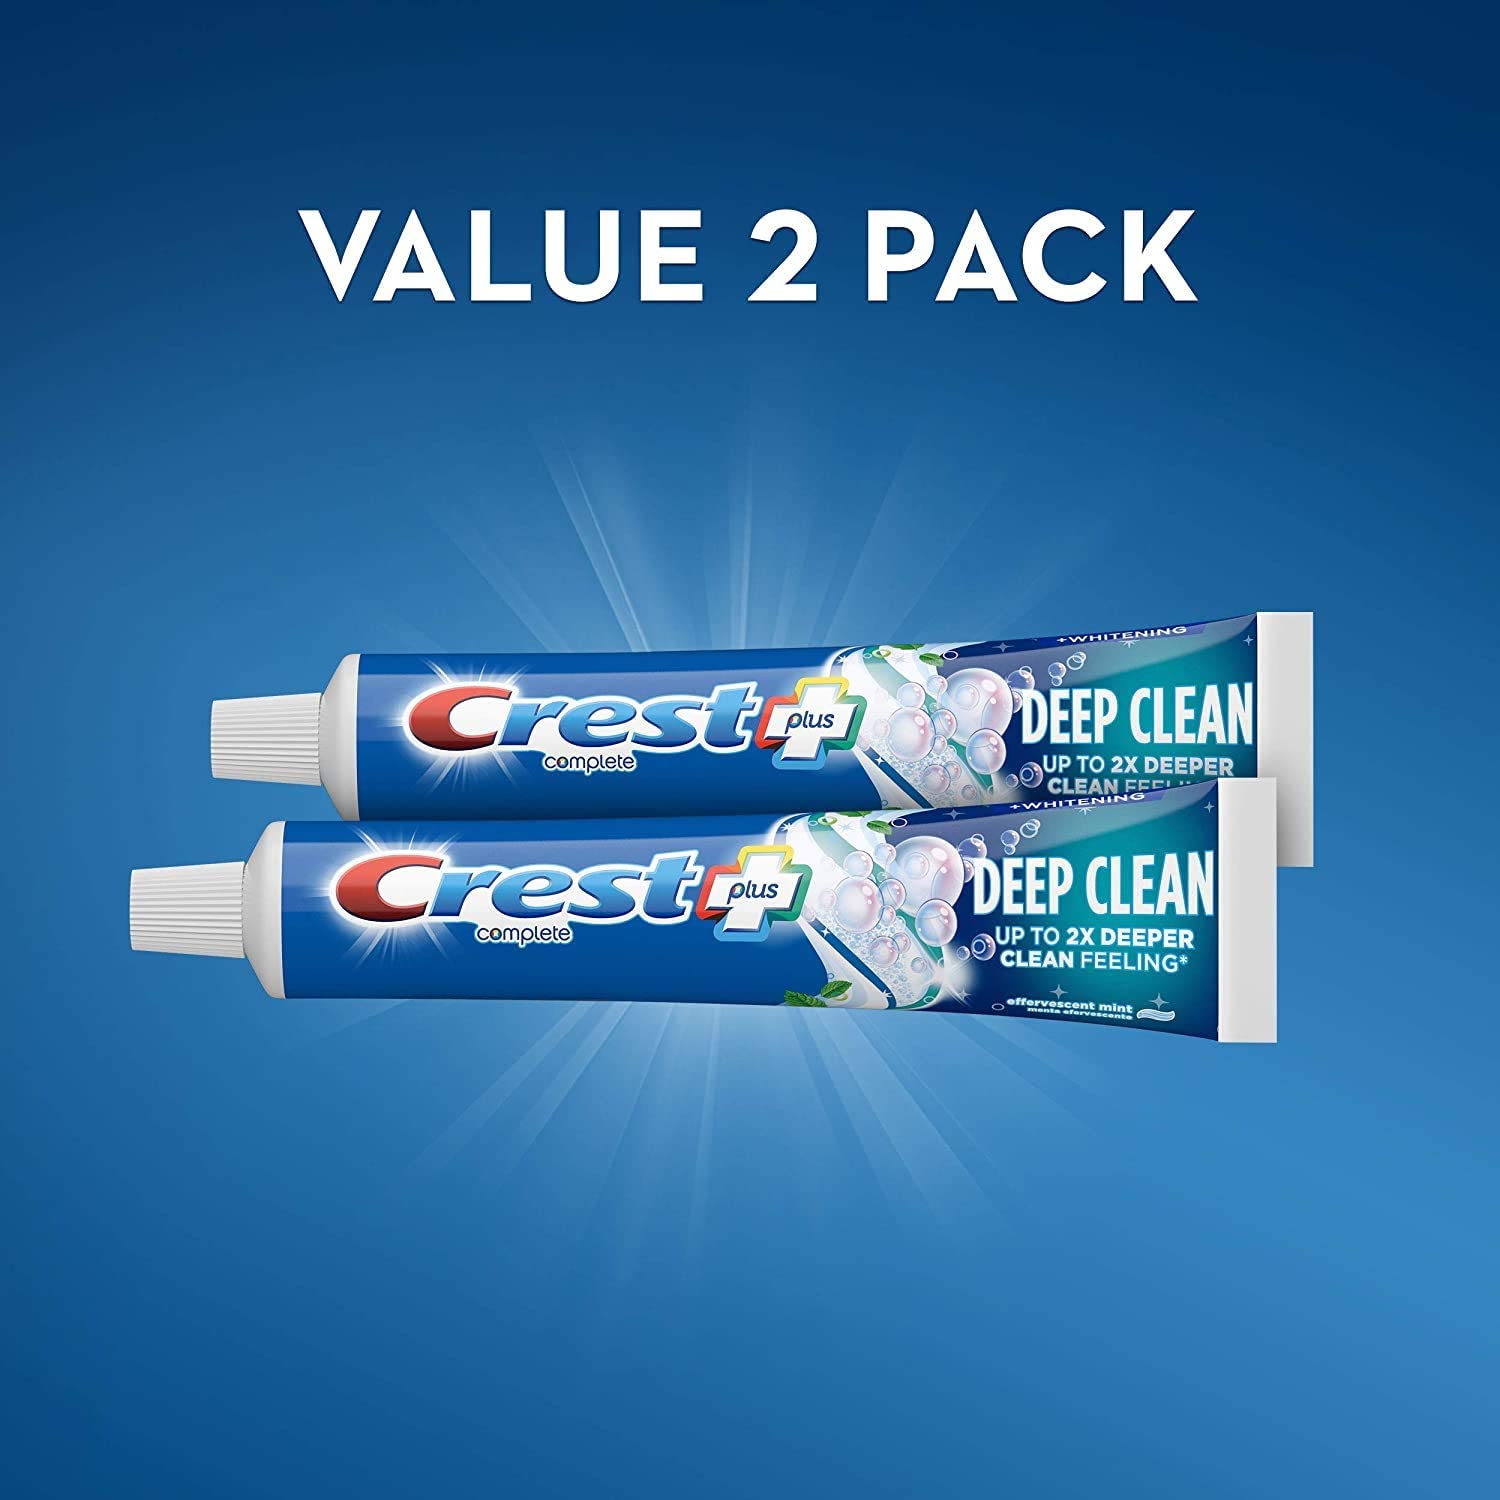 Complete Plus Deep Clean Complete Whitening Toothpaste, Mint, 5.4 oz, 2 Pack - image 4 of 9